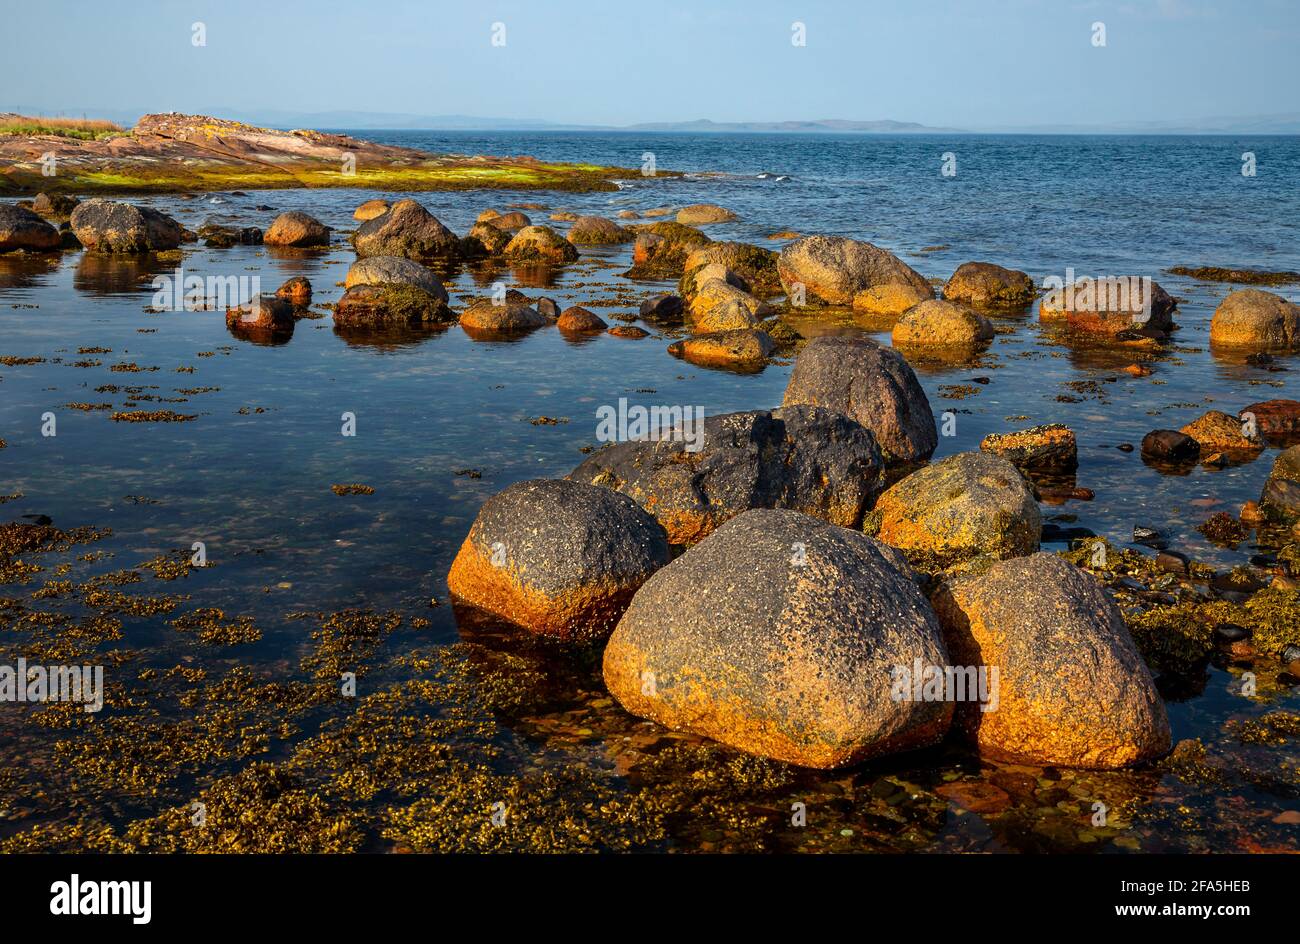 The Isle of Arran is an island off the west coast of Scotland. It is the largest island in the Firth of Clyde and the seventh largest Scottish island. Stock Photo